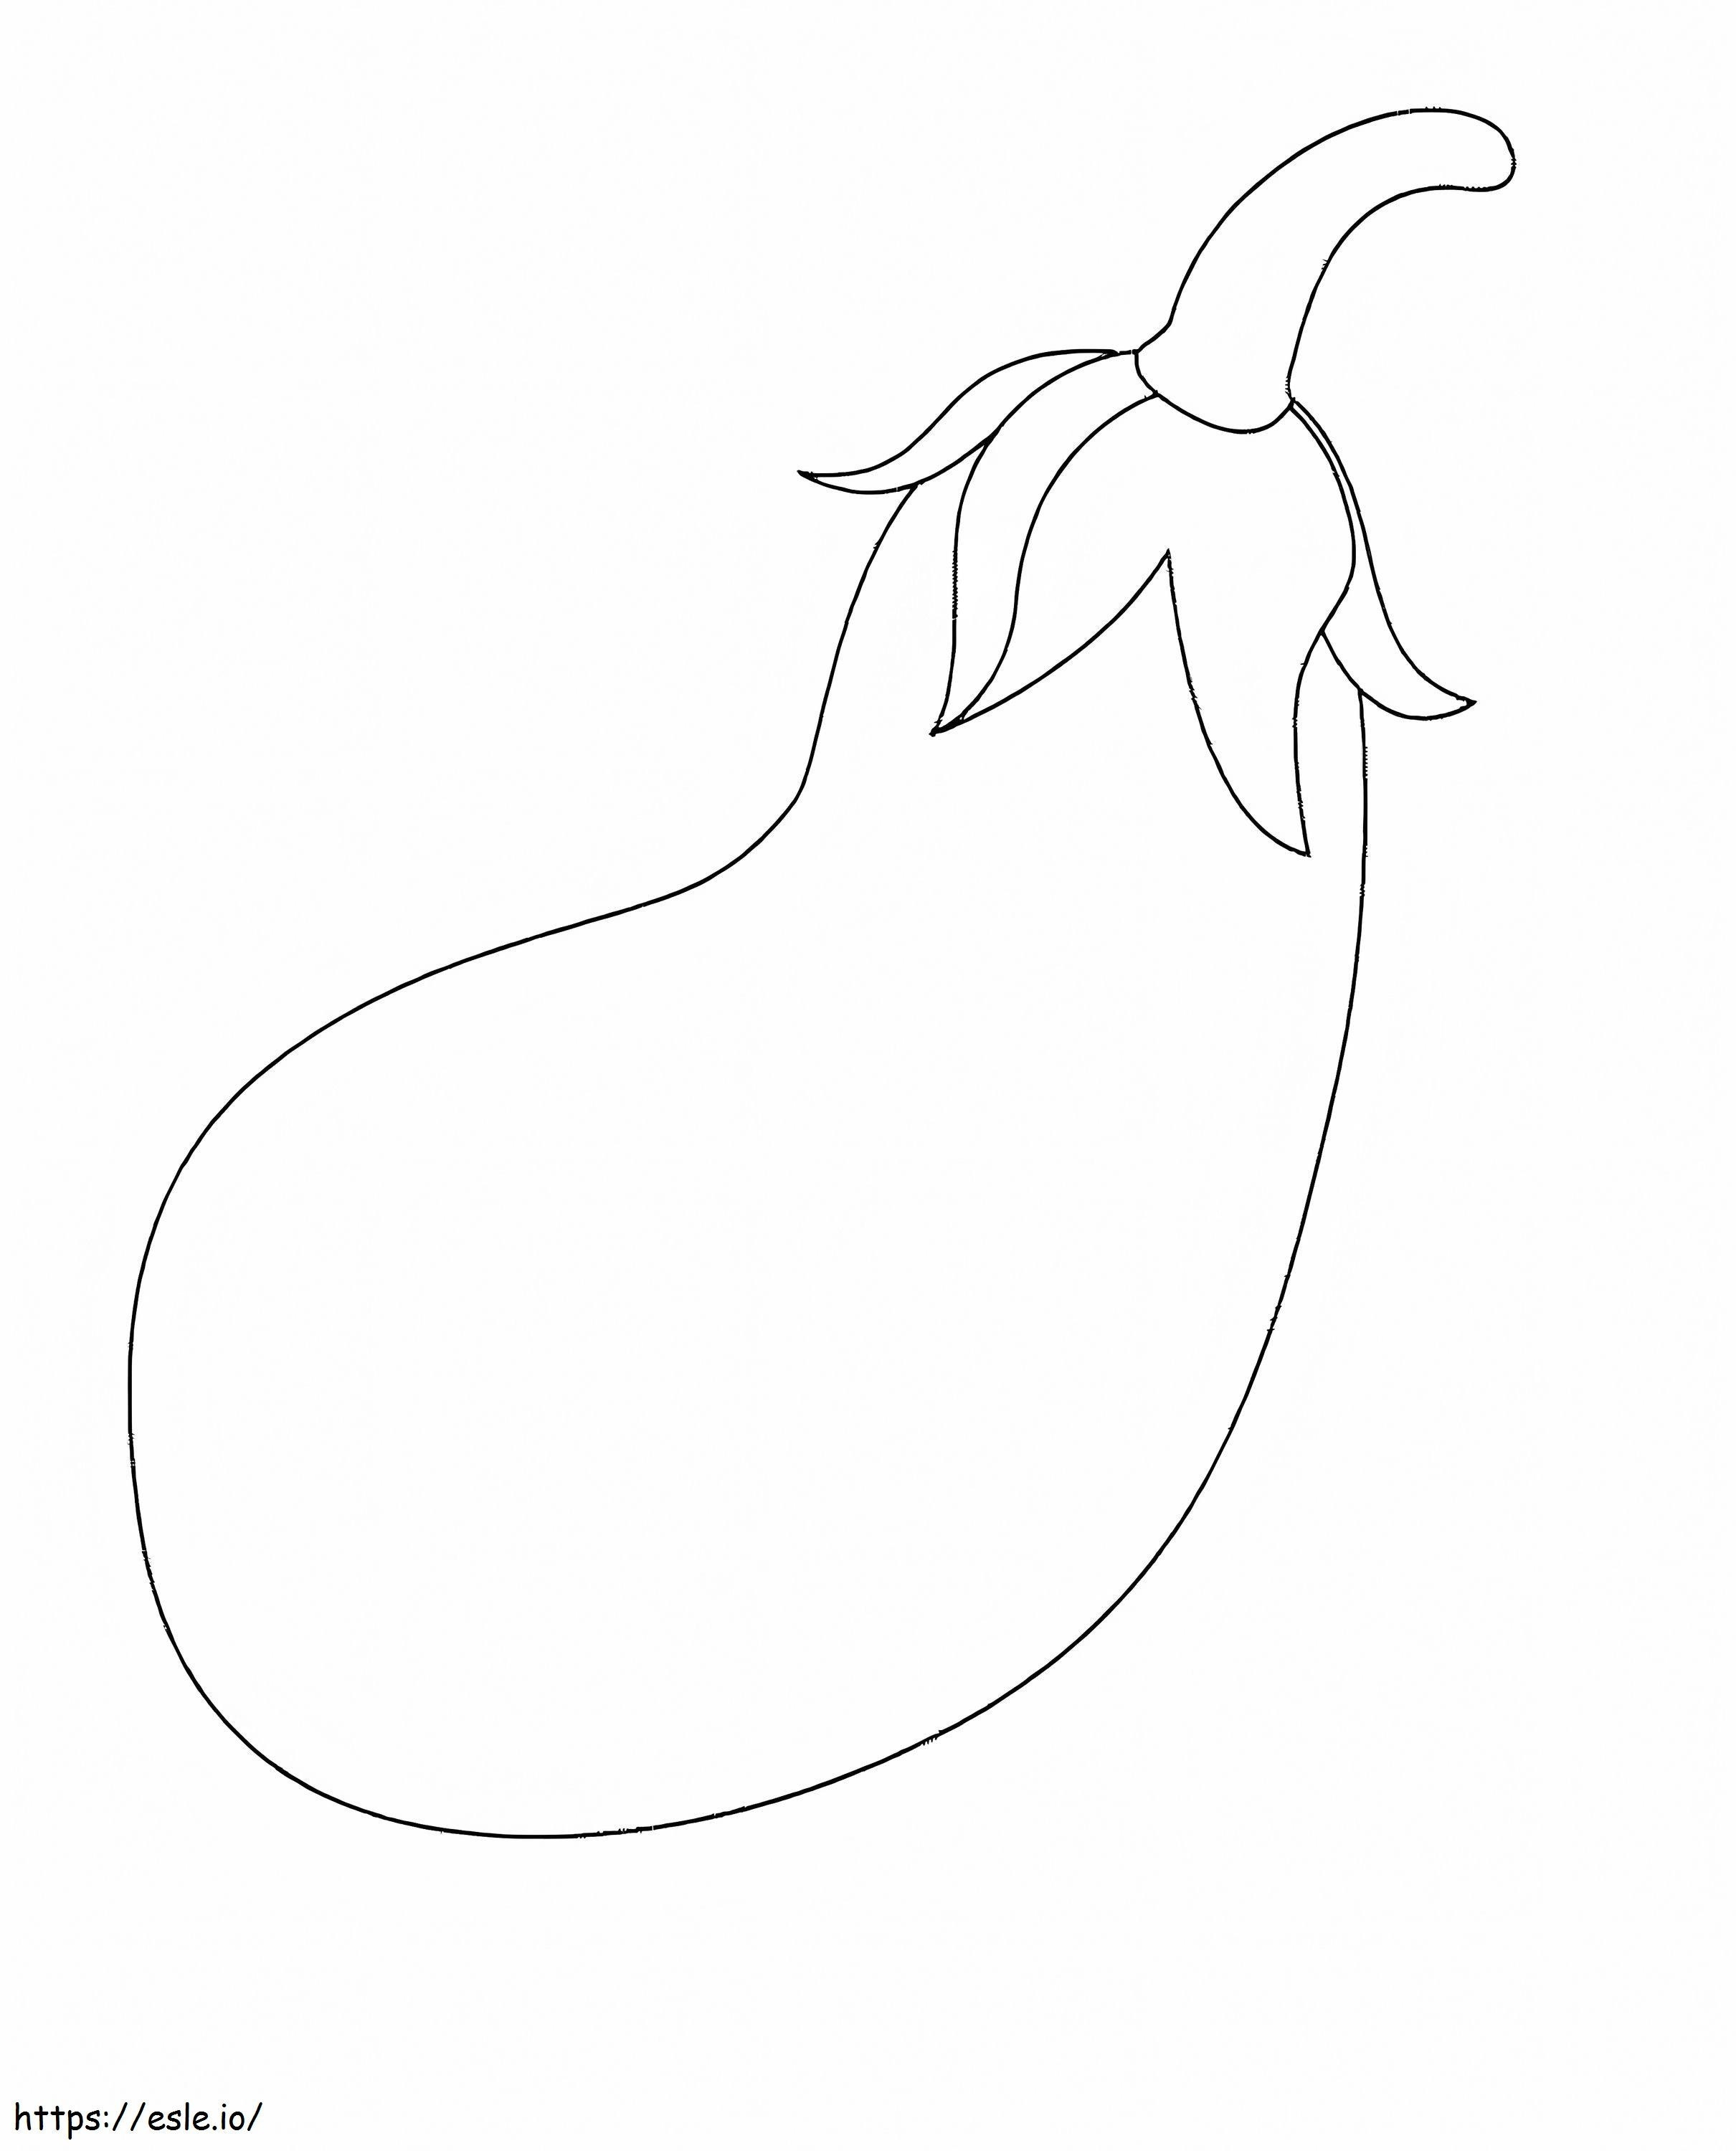 Vegetable Eggplant coloring page